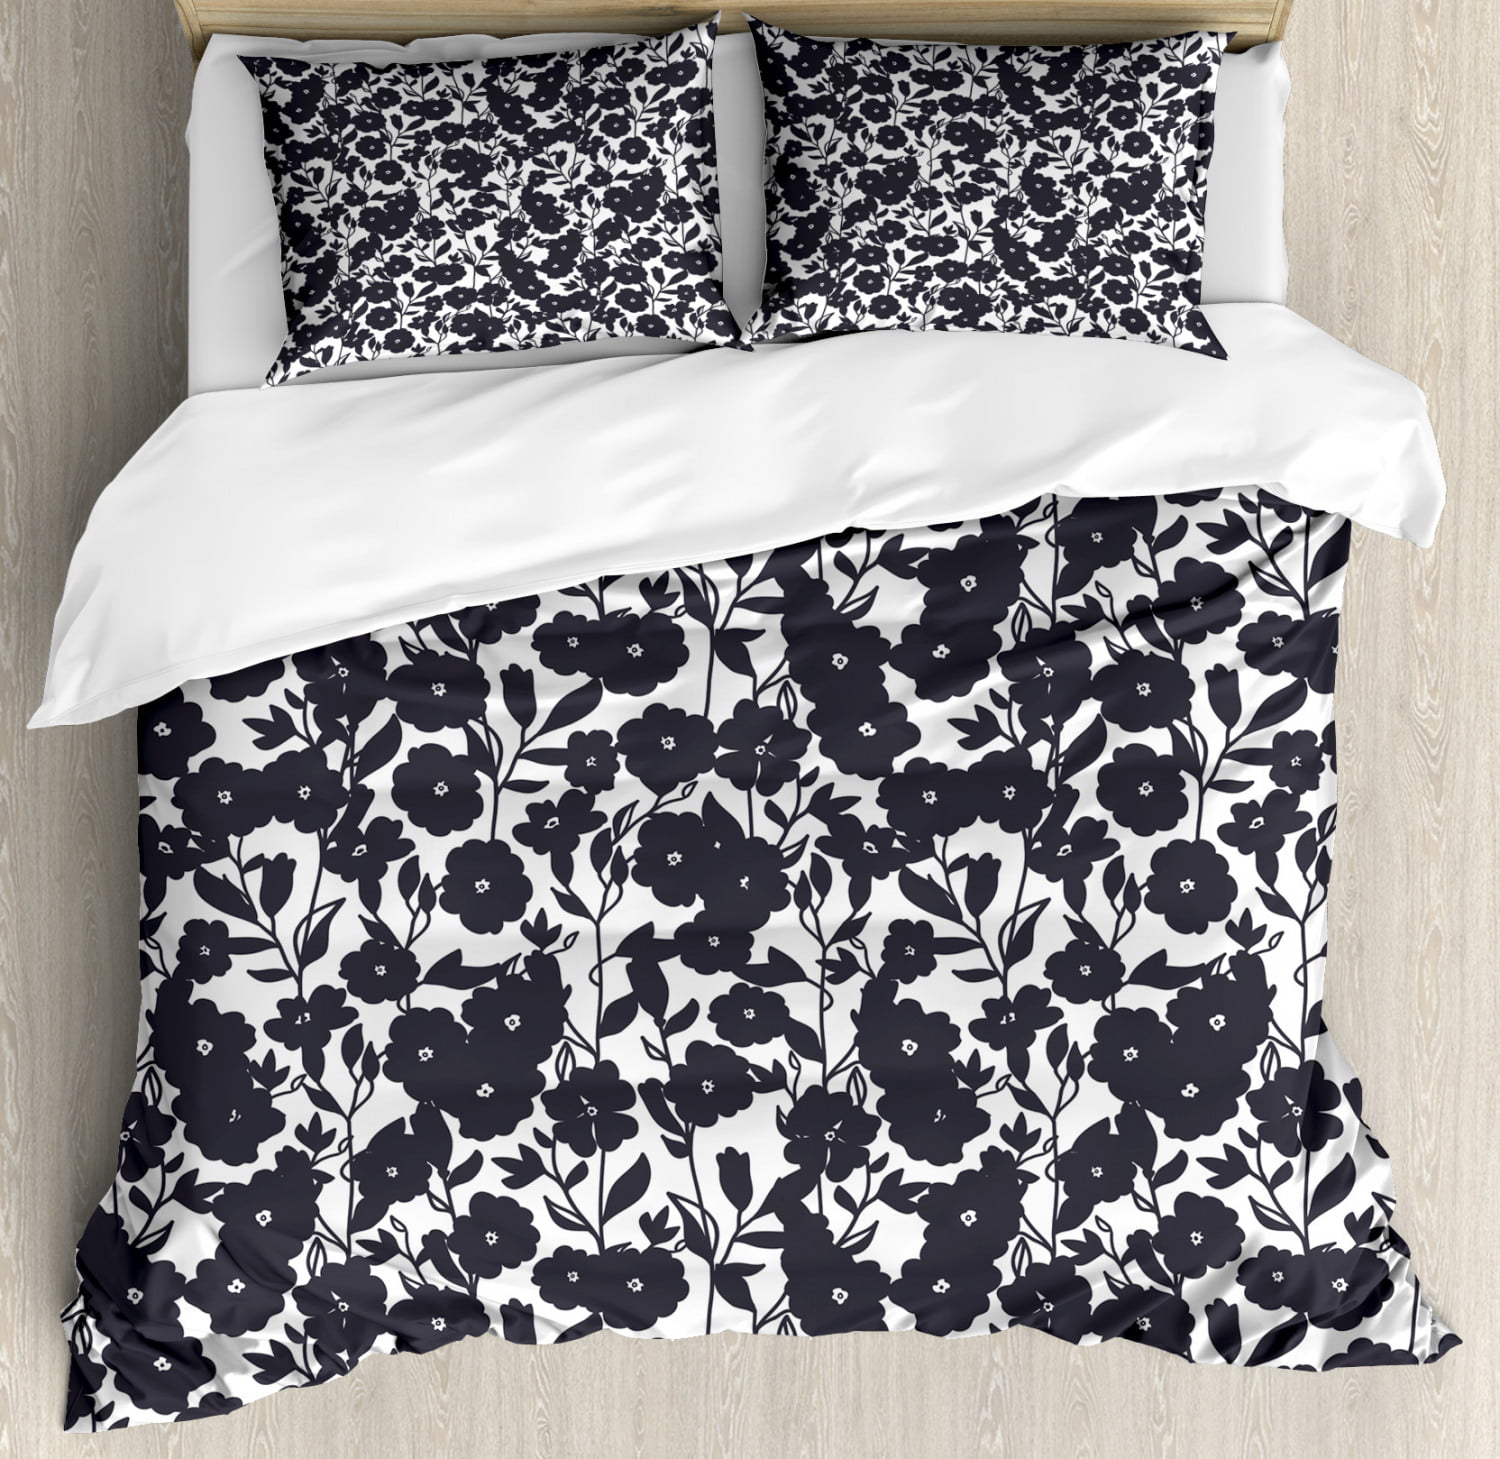 Floral Duvet Cover Set Dark Charcoal Gardening Flowers Leaves And